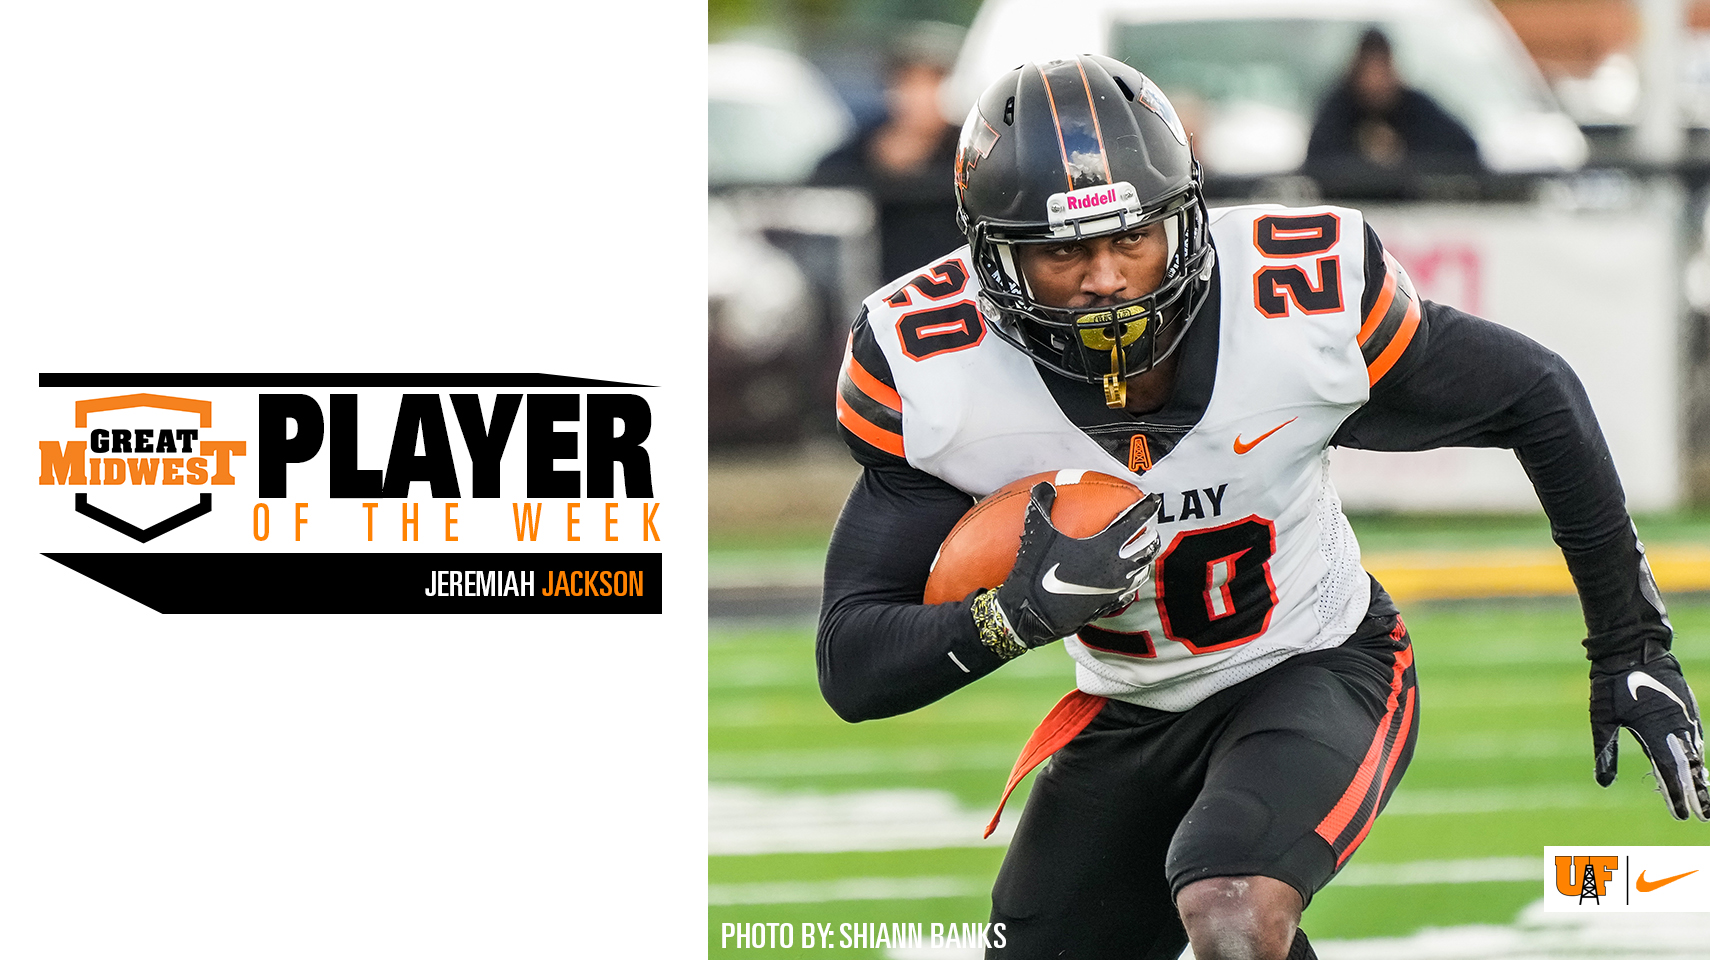 Jeremiah Jackson Earns Defensive Player of the Week